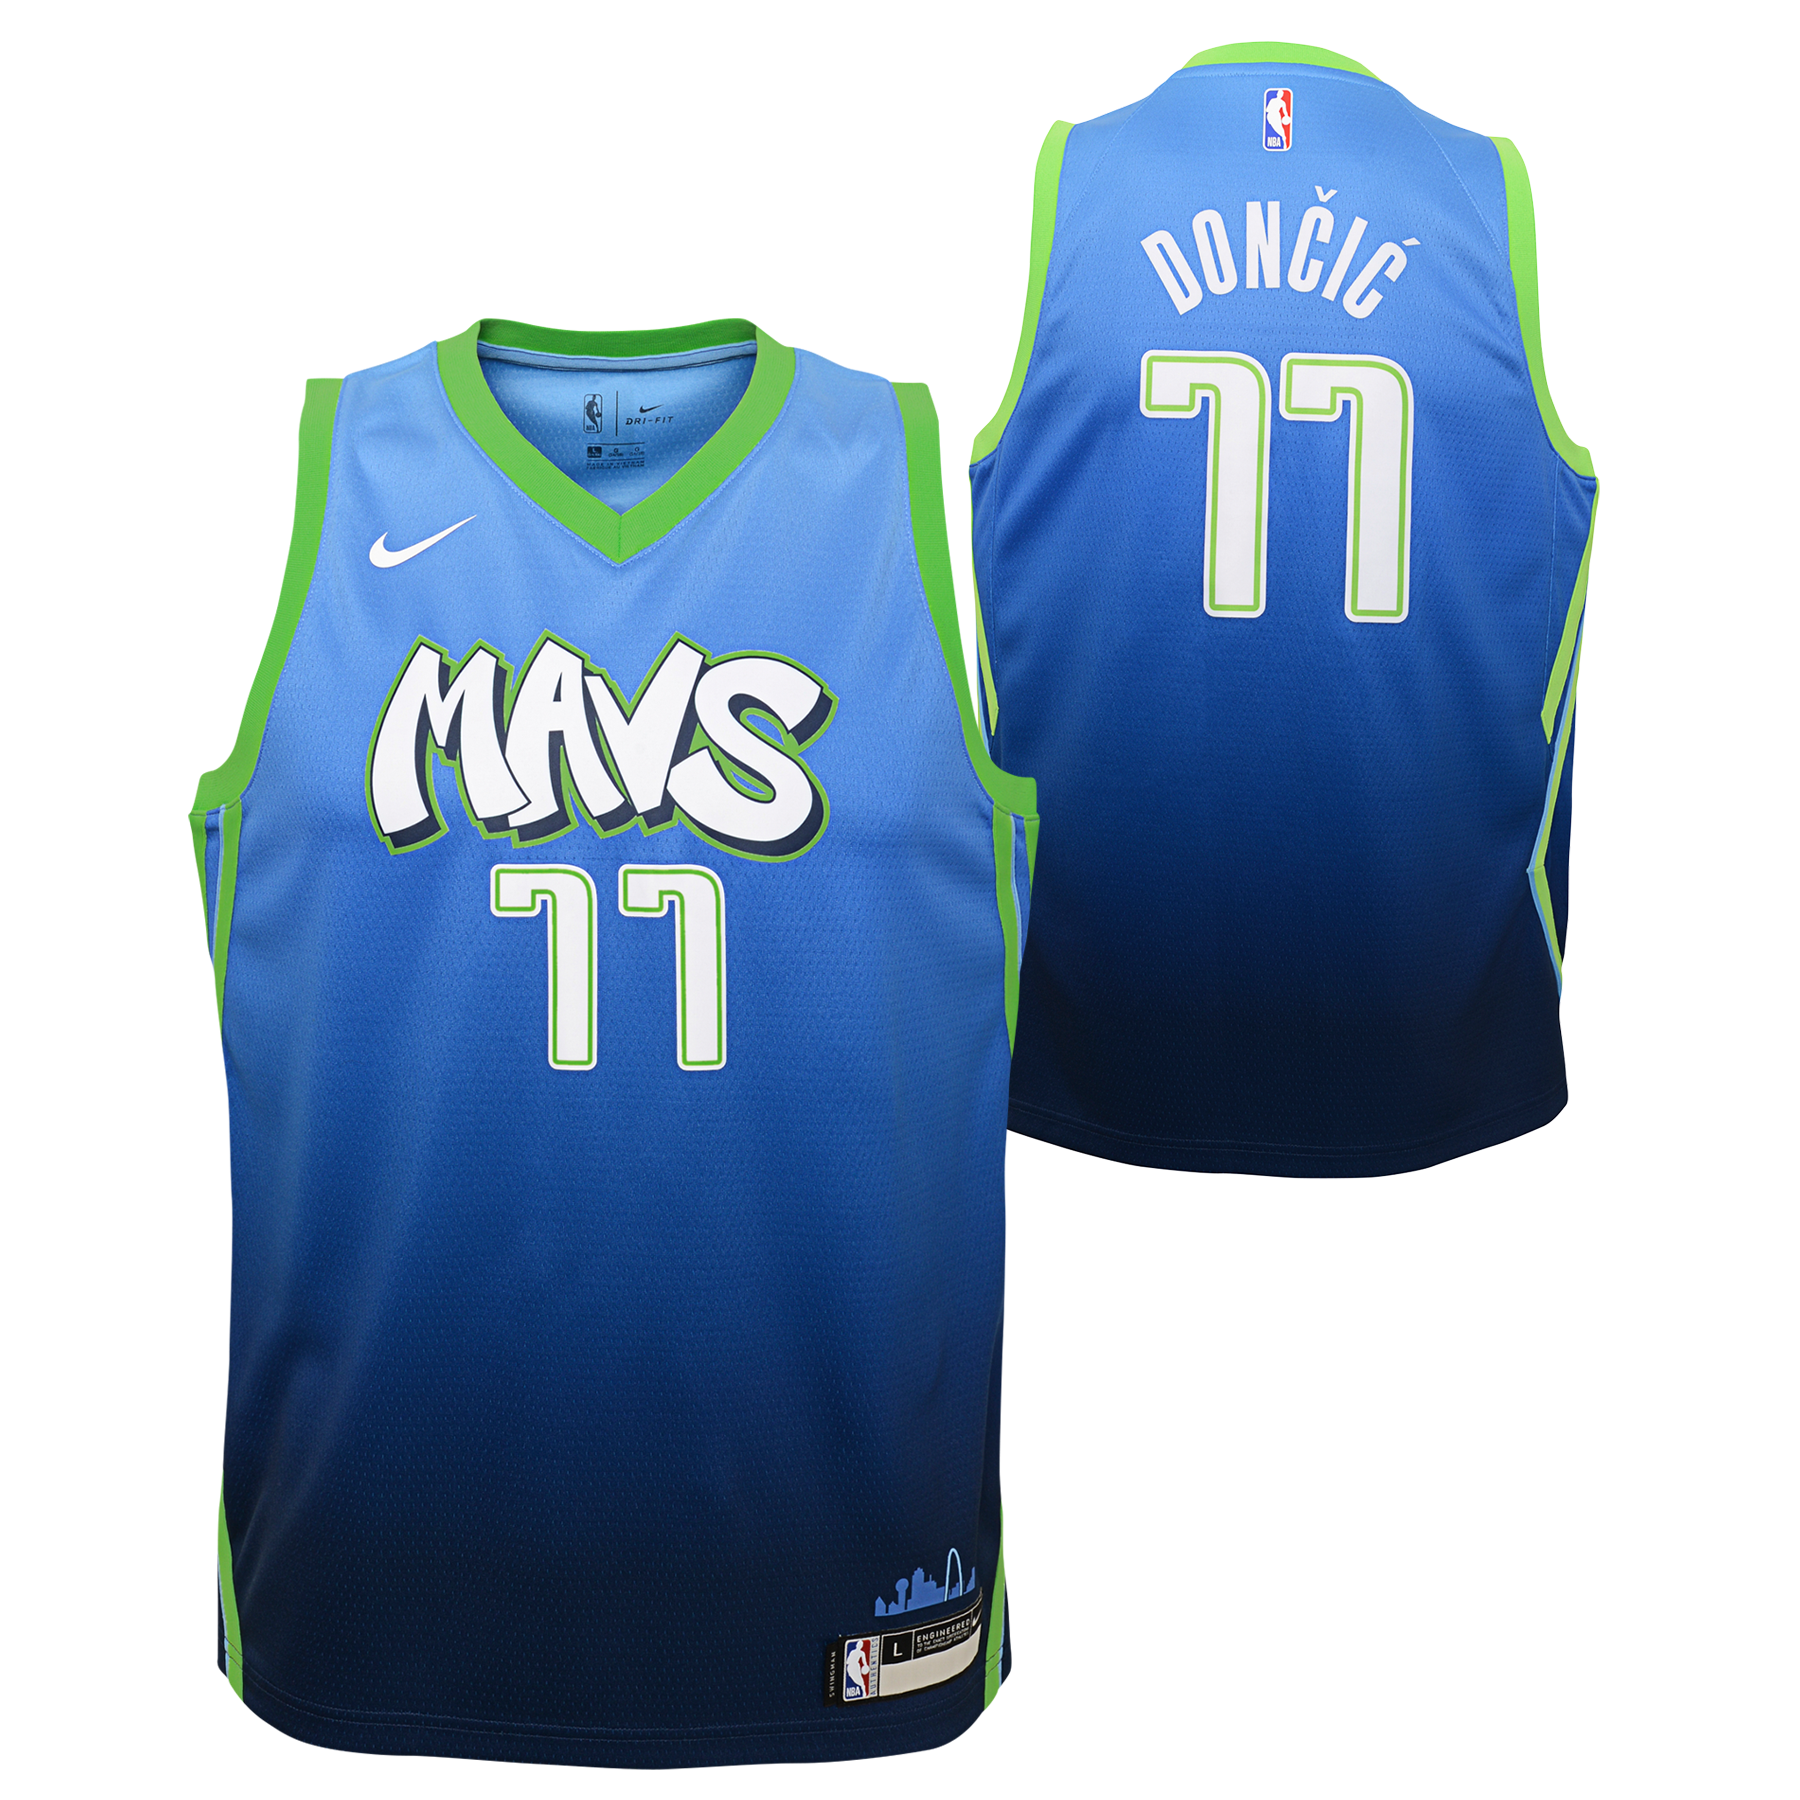 doncic jersey 2019